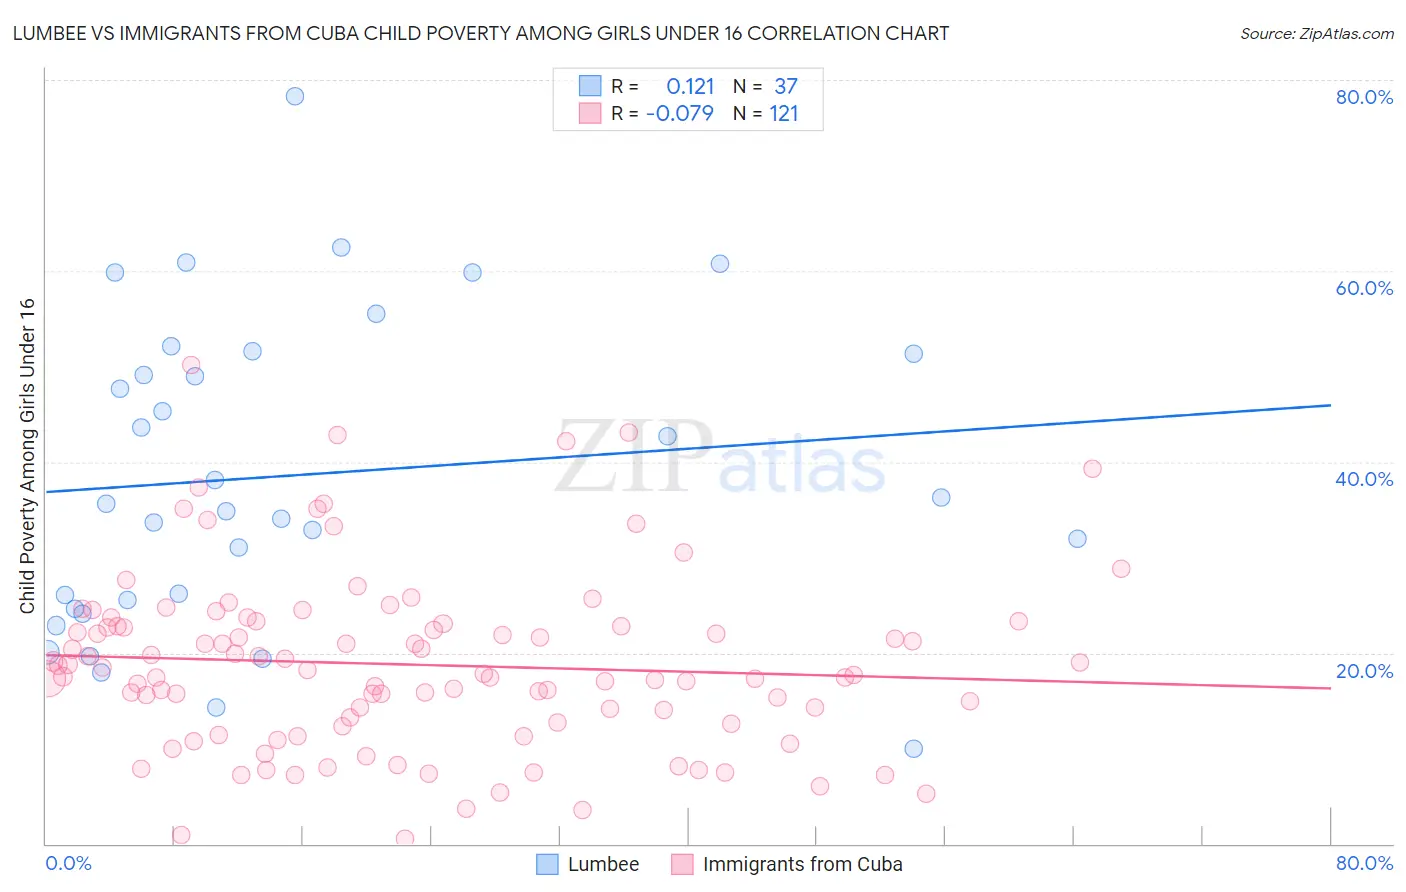 Lumbee vs Immigrants from Cuba Child Poverty Among Girls Under 16